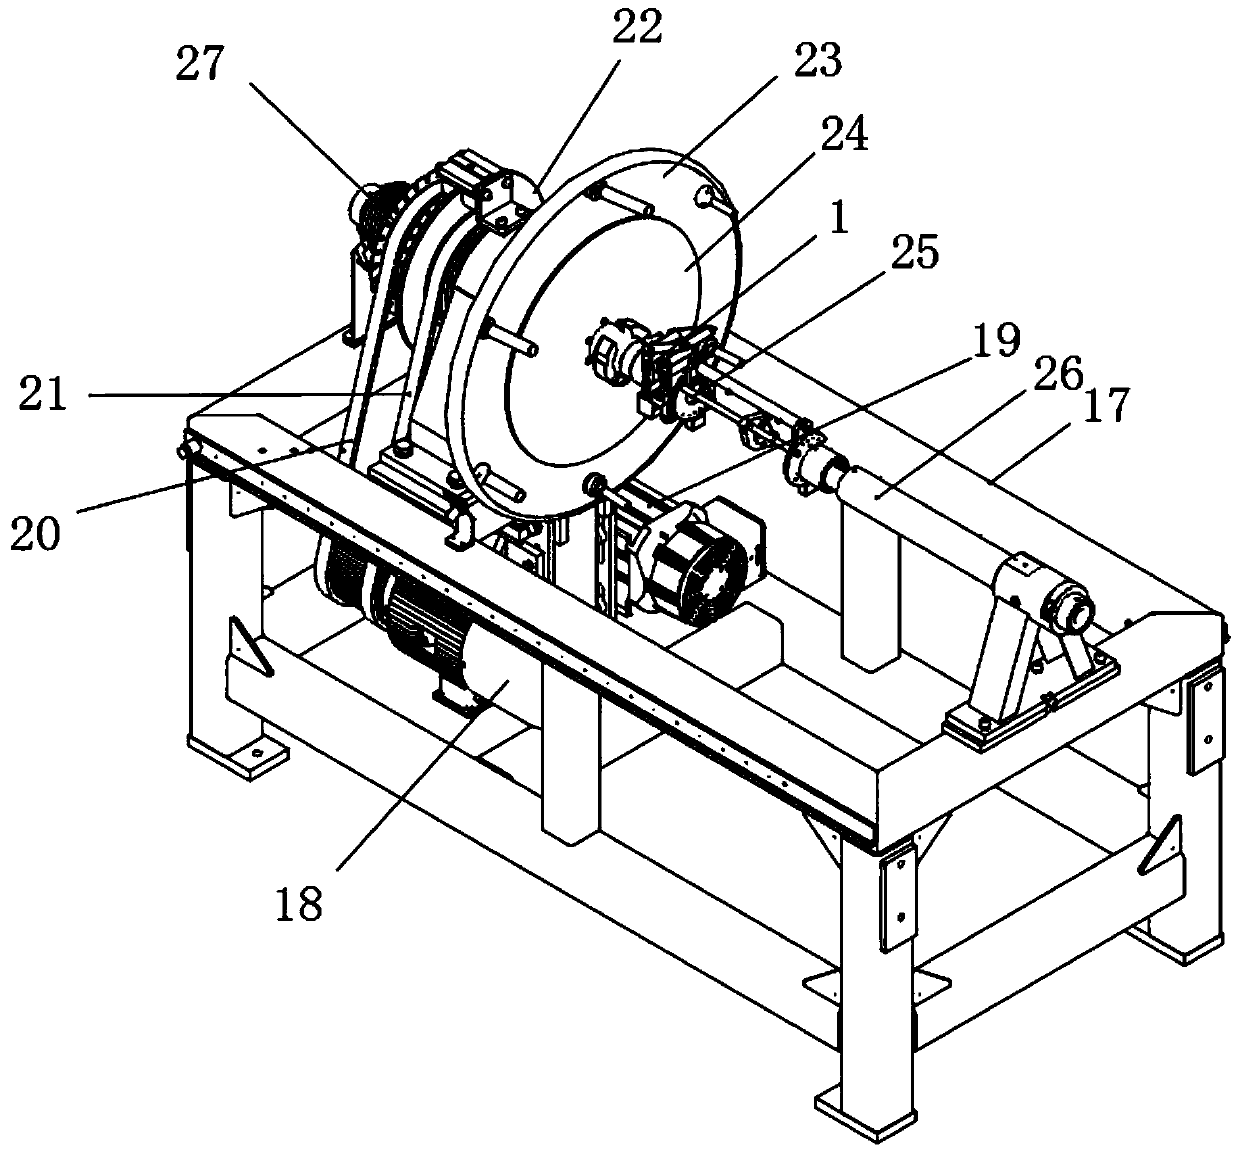 Concentric wrapping device capable of actively releasing belt